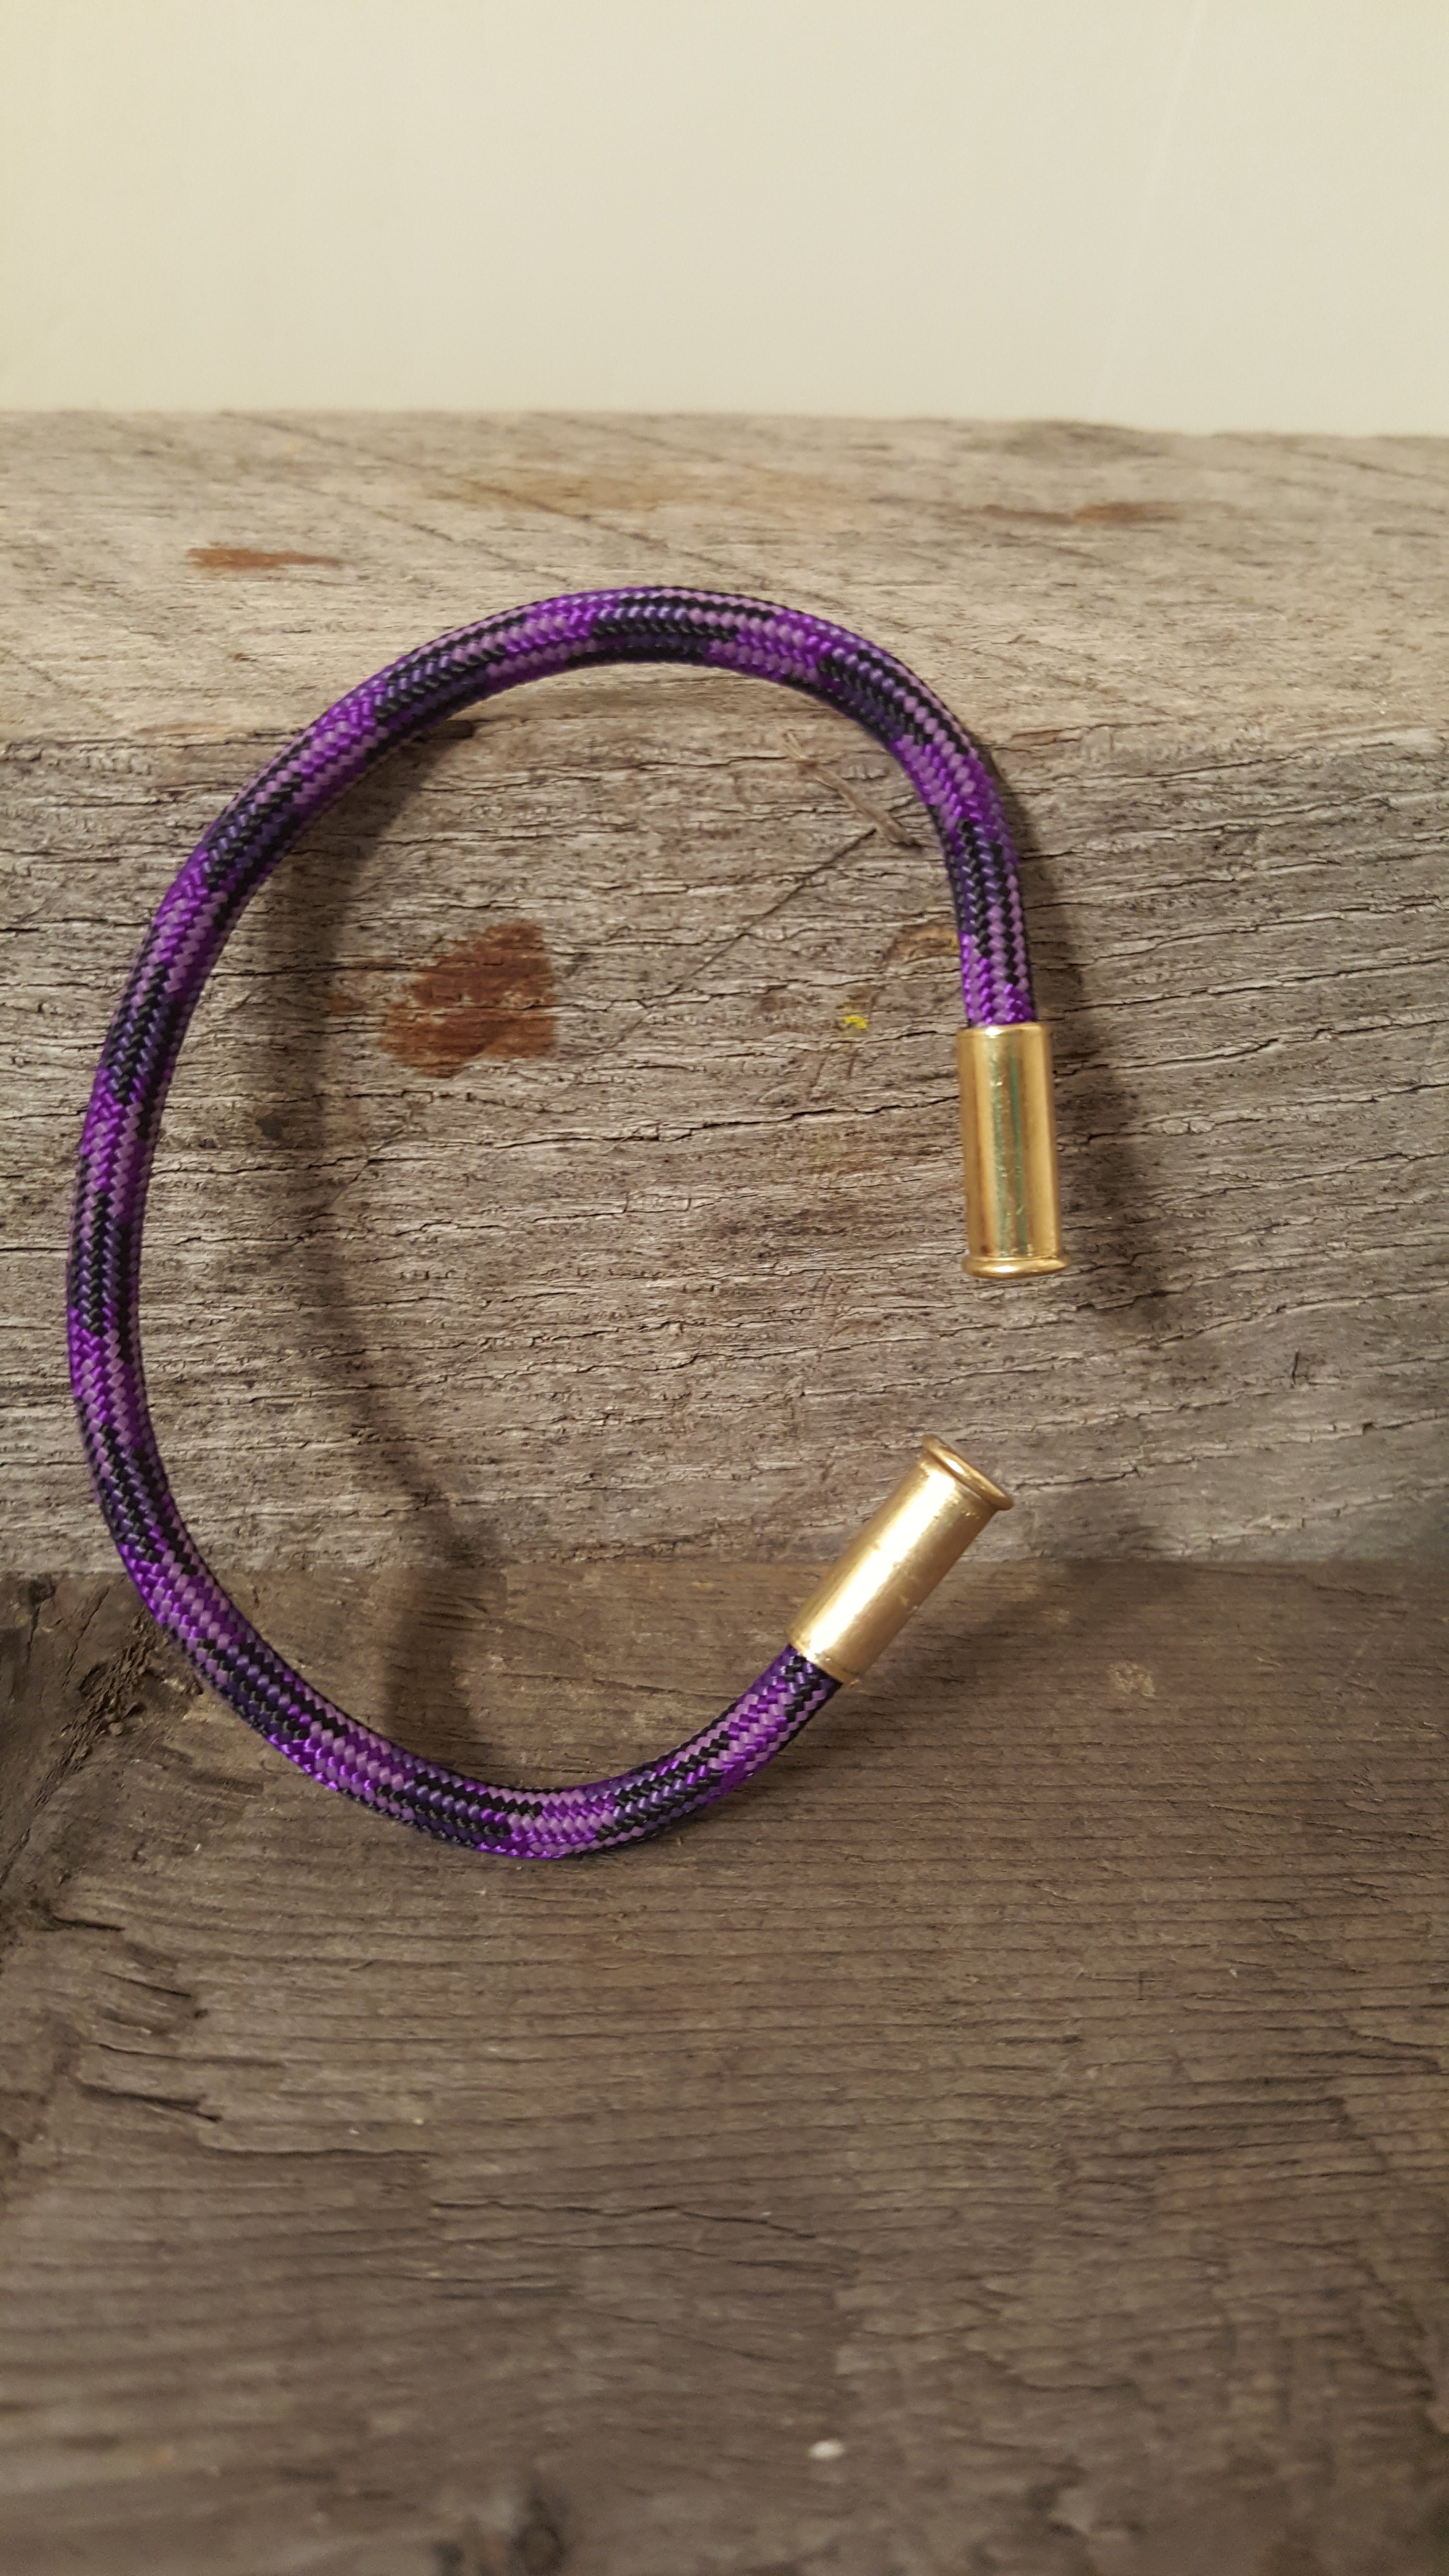 Thin style Paracord Ammo Bracelet Purple Black 22 LR bullet castings Great 4 Gals and Guys